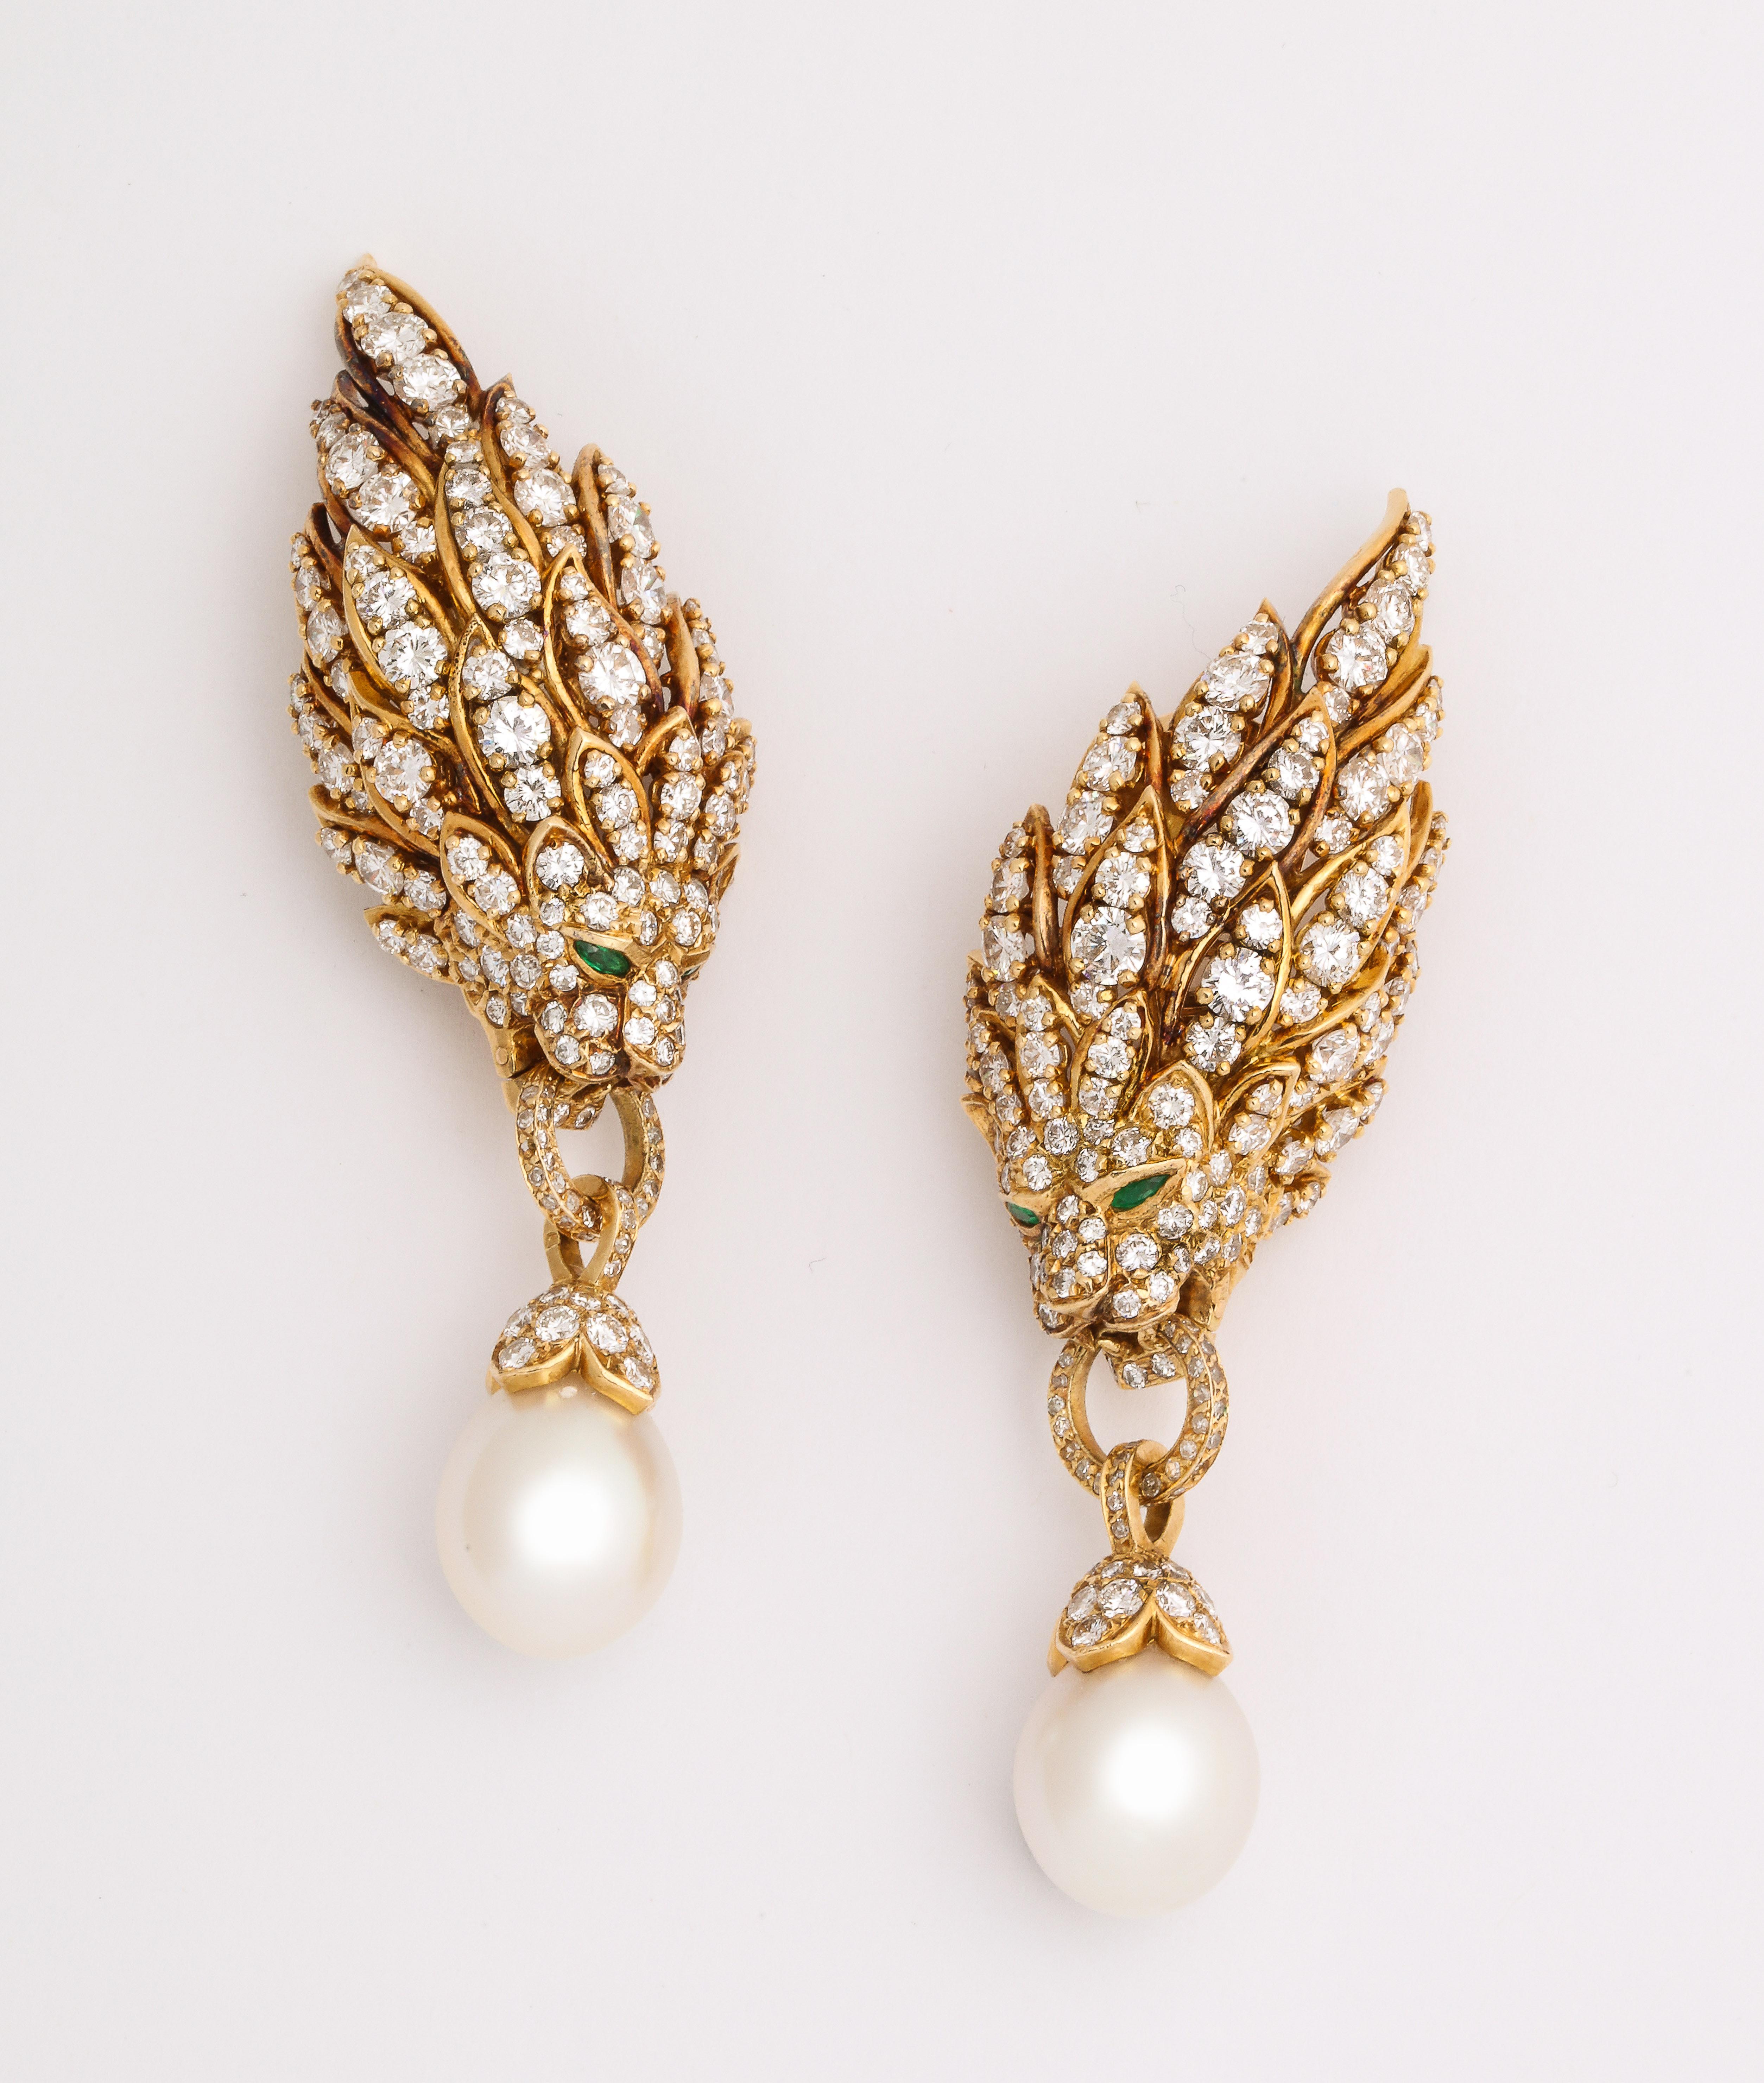 Van Cleef & Arpels Pearl & Diamond Lion Head Earrings

Lions heads open and closes to make the pearl detachable 